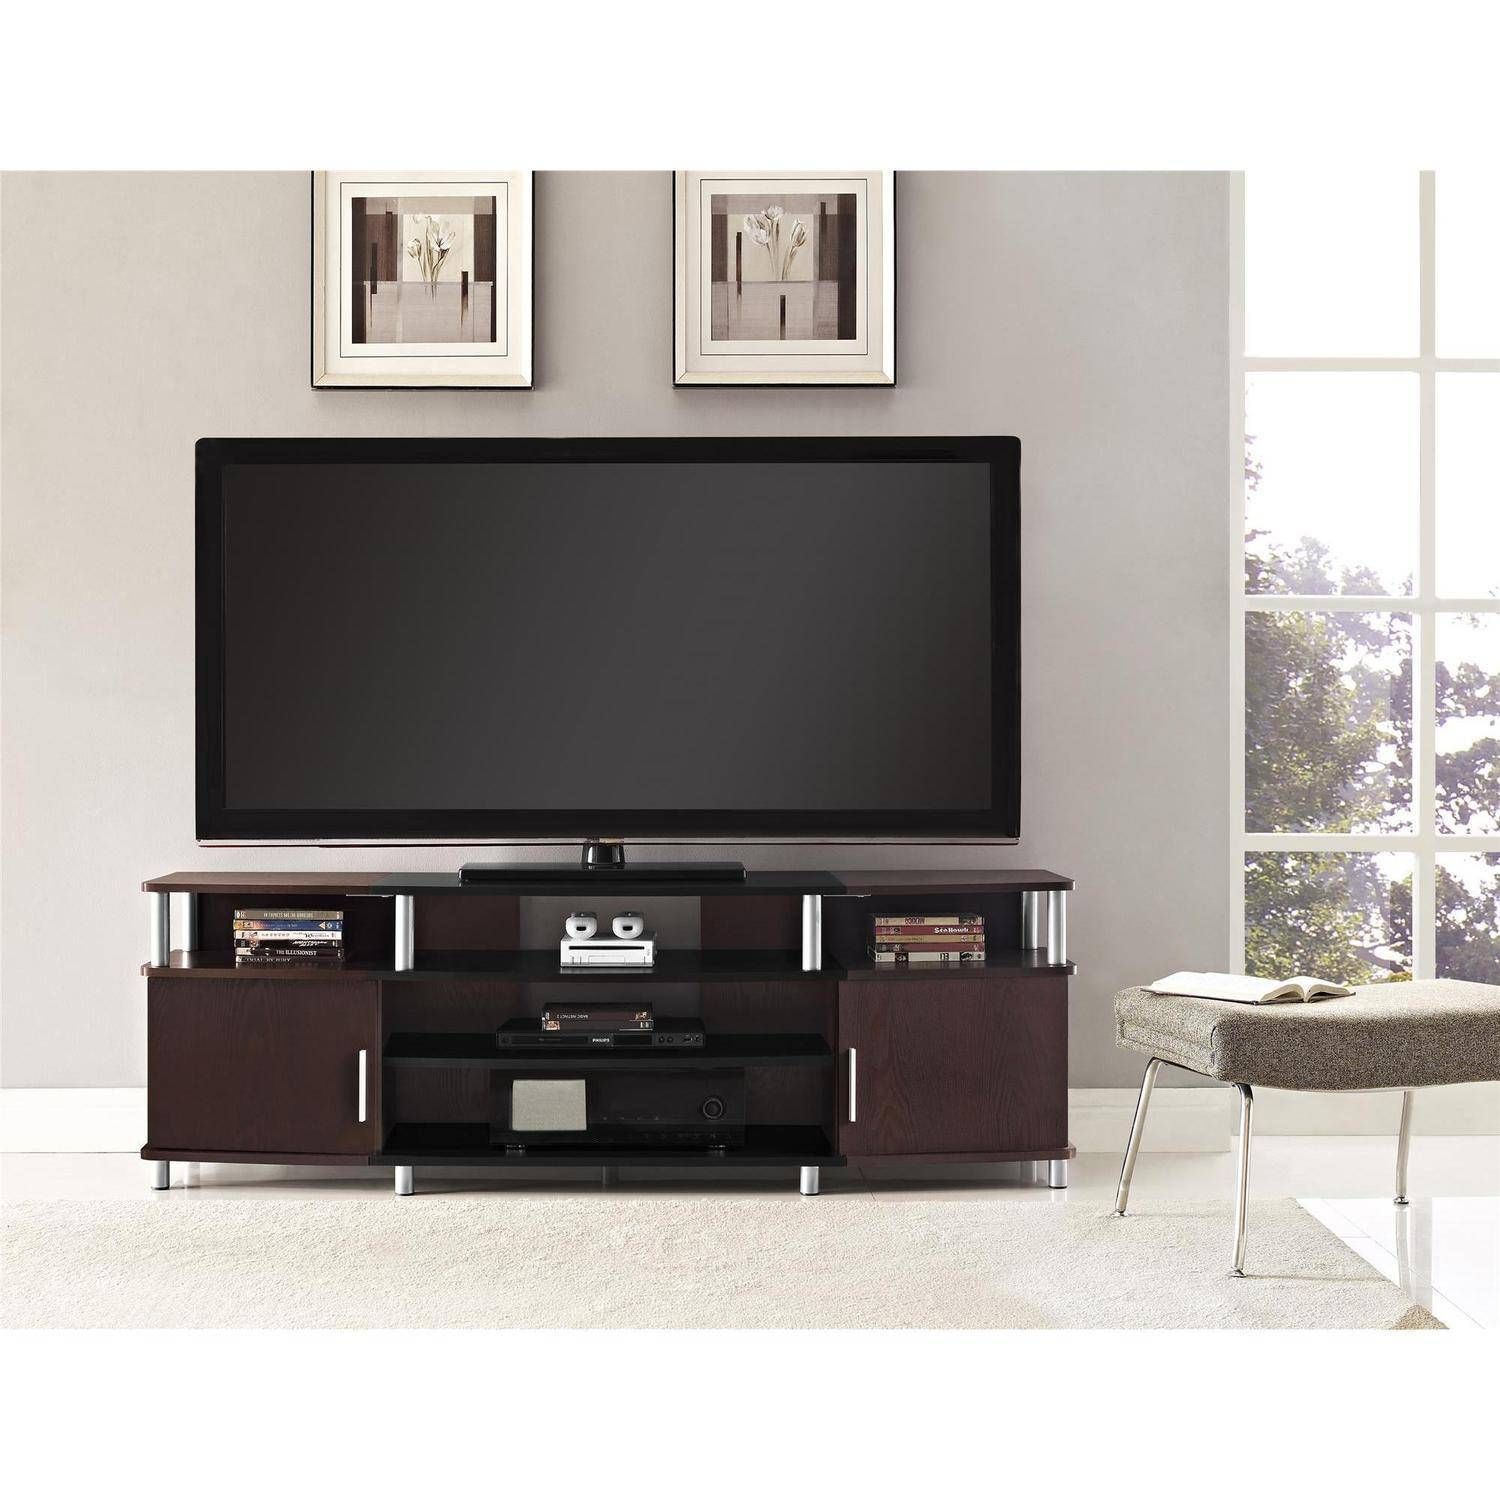 Carson Tv Stand For Tvs Up To 70" Wide, Cherry – Walmart Regarding Light Cherry Tv Stands (View 2 of 15)